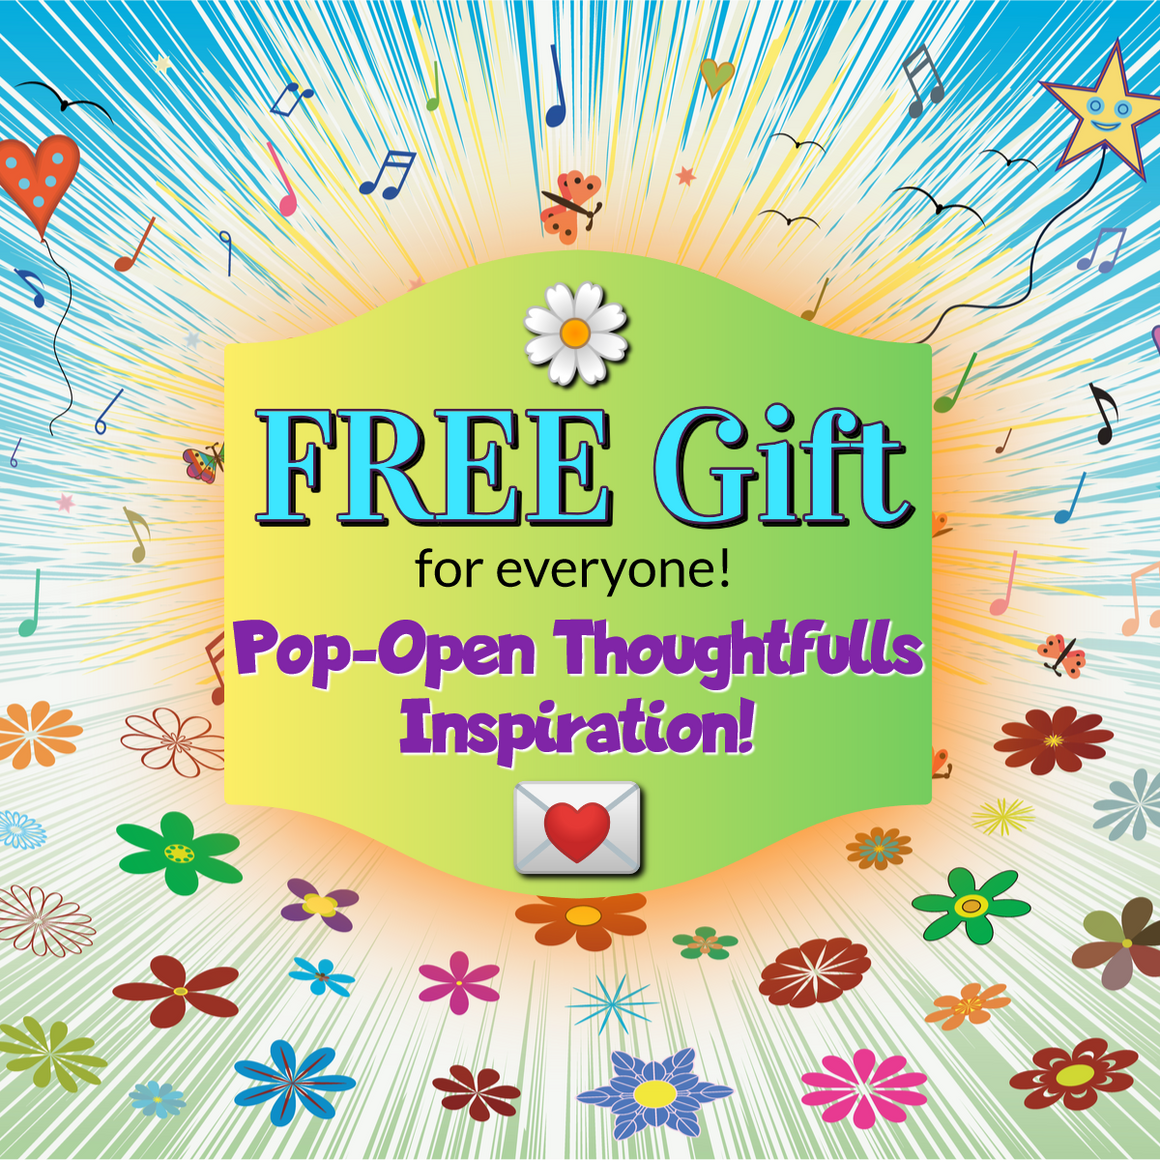 Free Thoughtfull Pop-Open Inspiration Card (FREE shipping*)